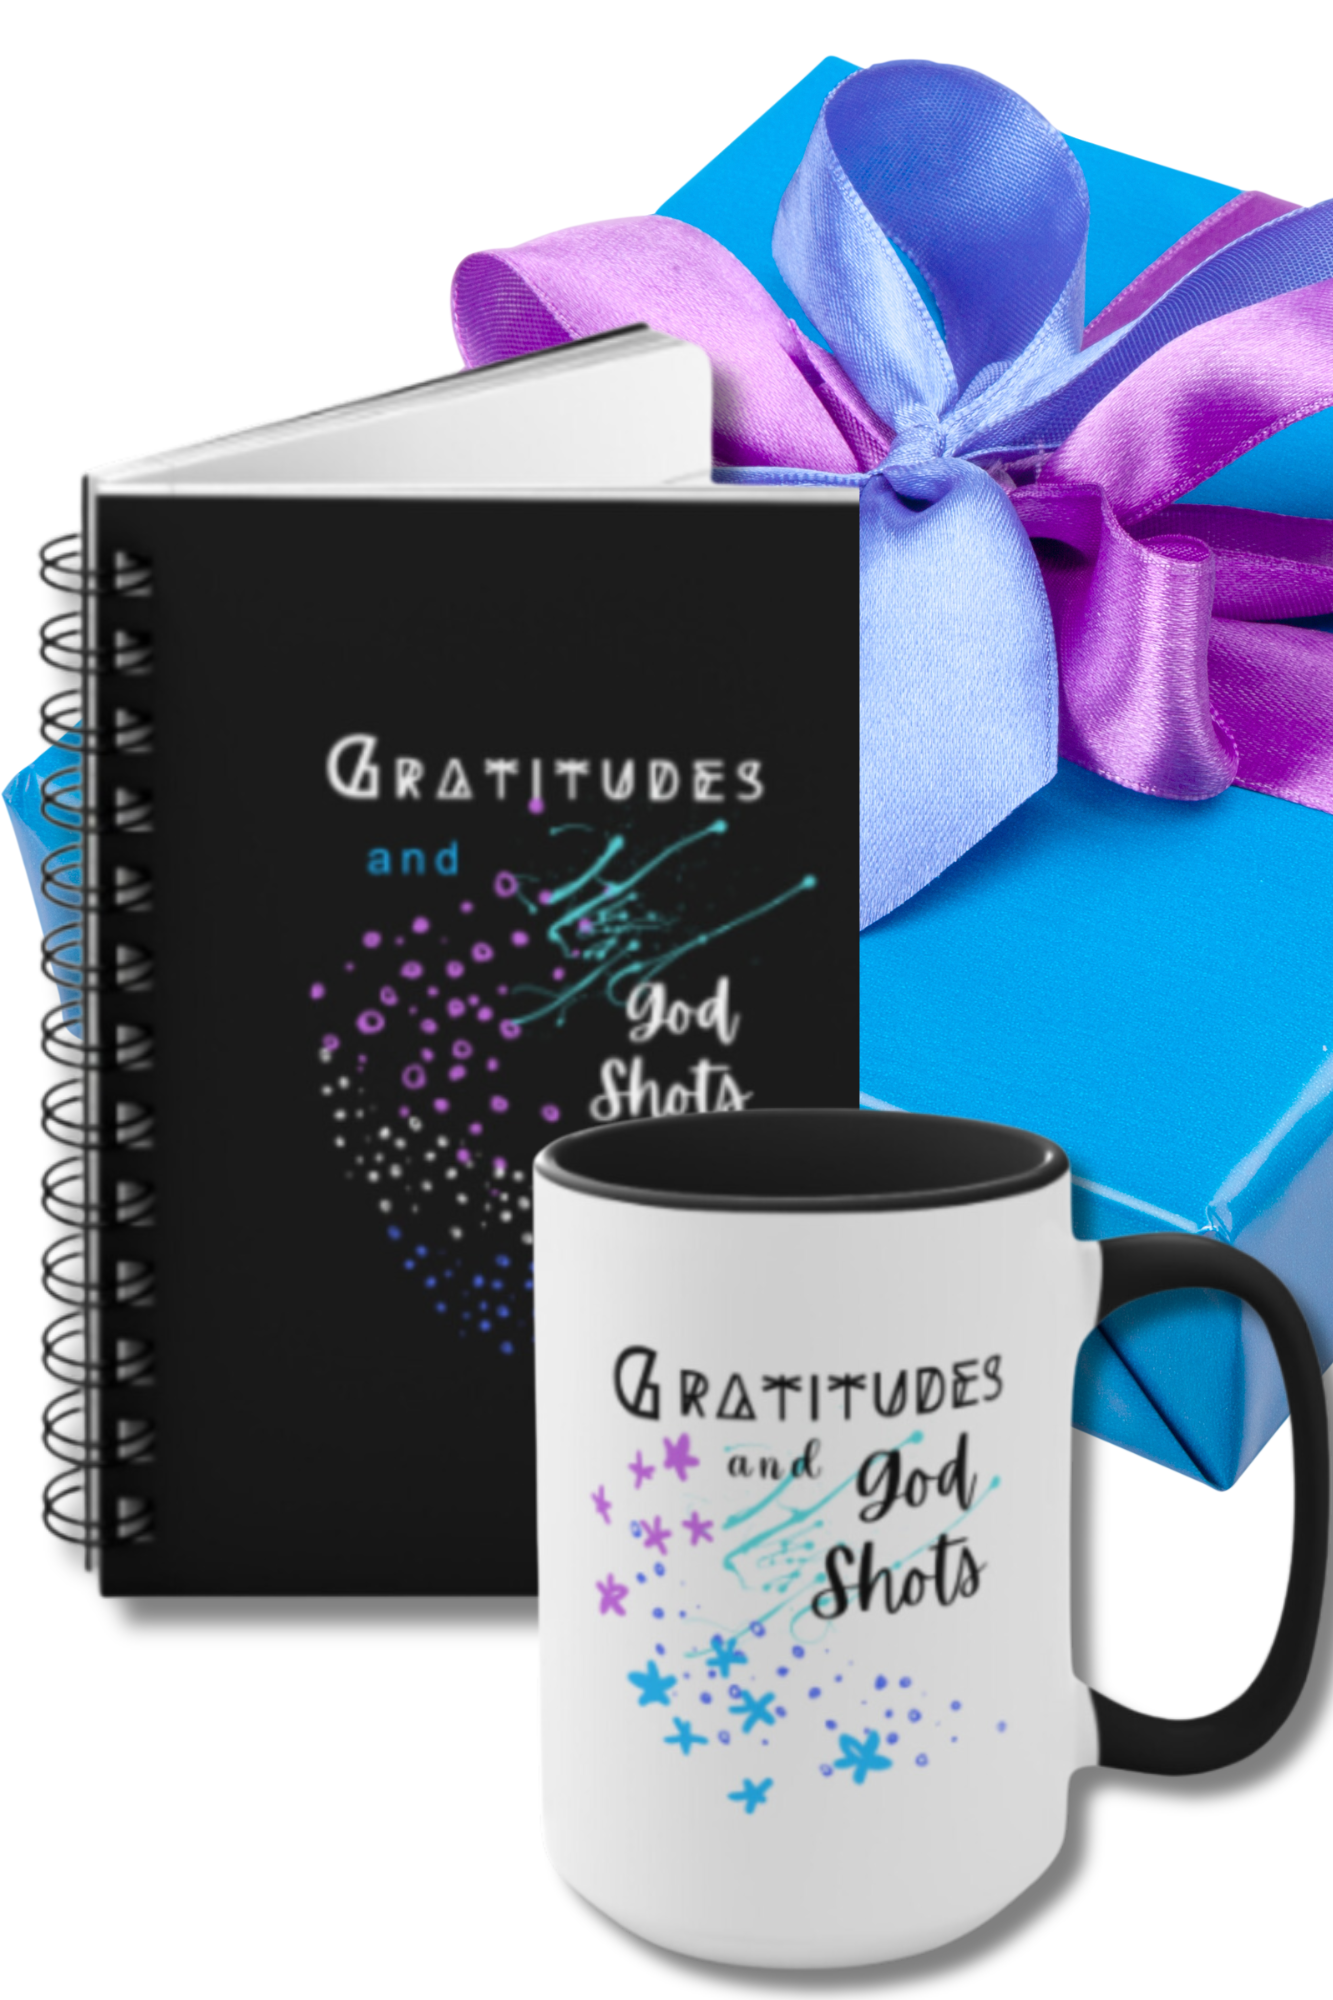 RECOVERY TOOLKIT "Gratitudes and God Shots" 15 oz. Mug w/ Recovery Journal (2 gifts in 1) FREE SHIPPING